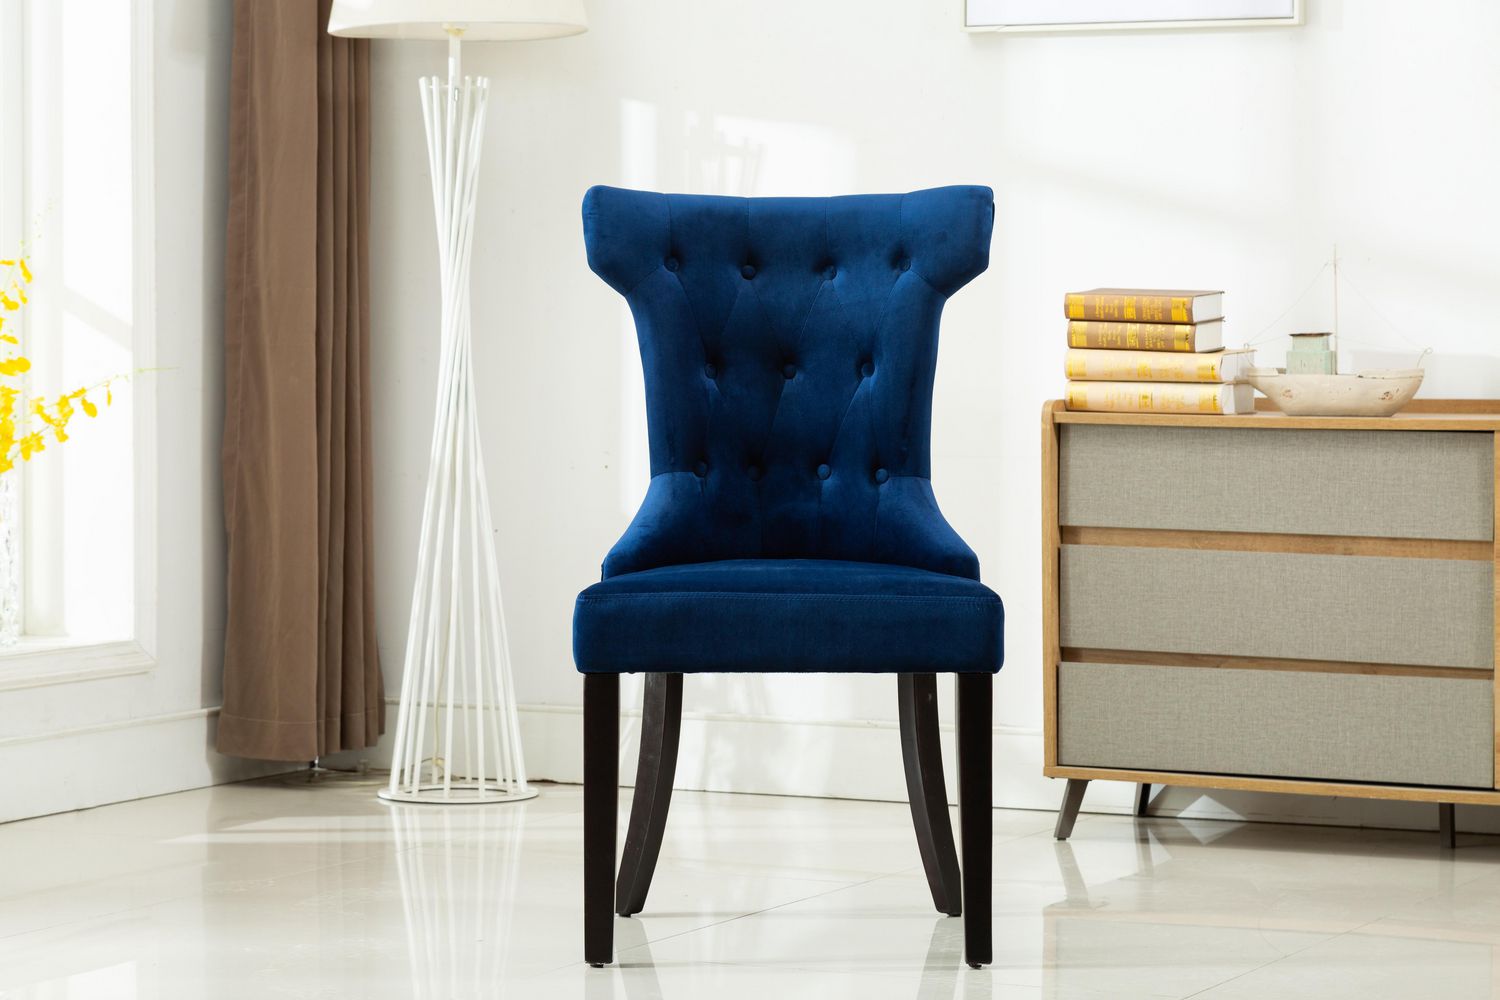 ERICA SET OF TWO ACCENT CHAIRSBLUE Walmart Canada